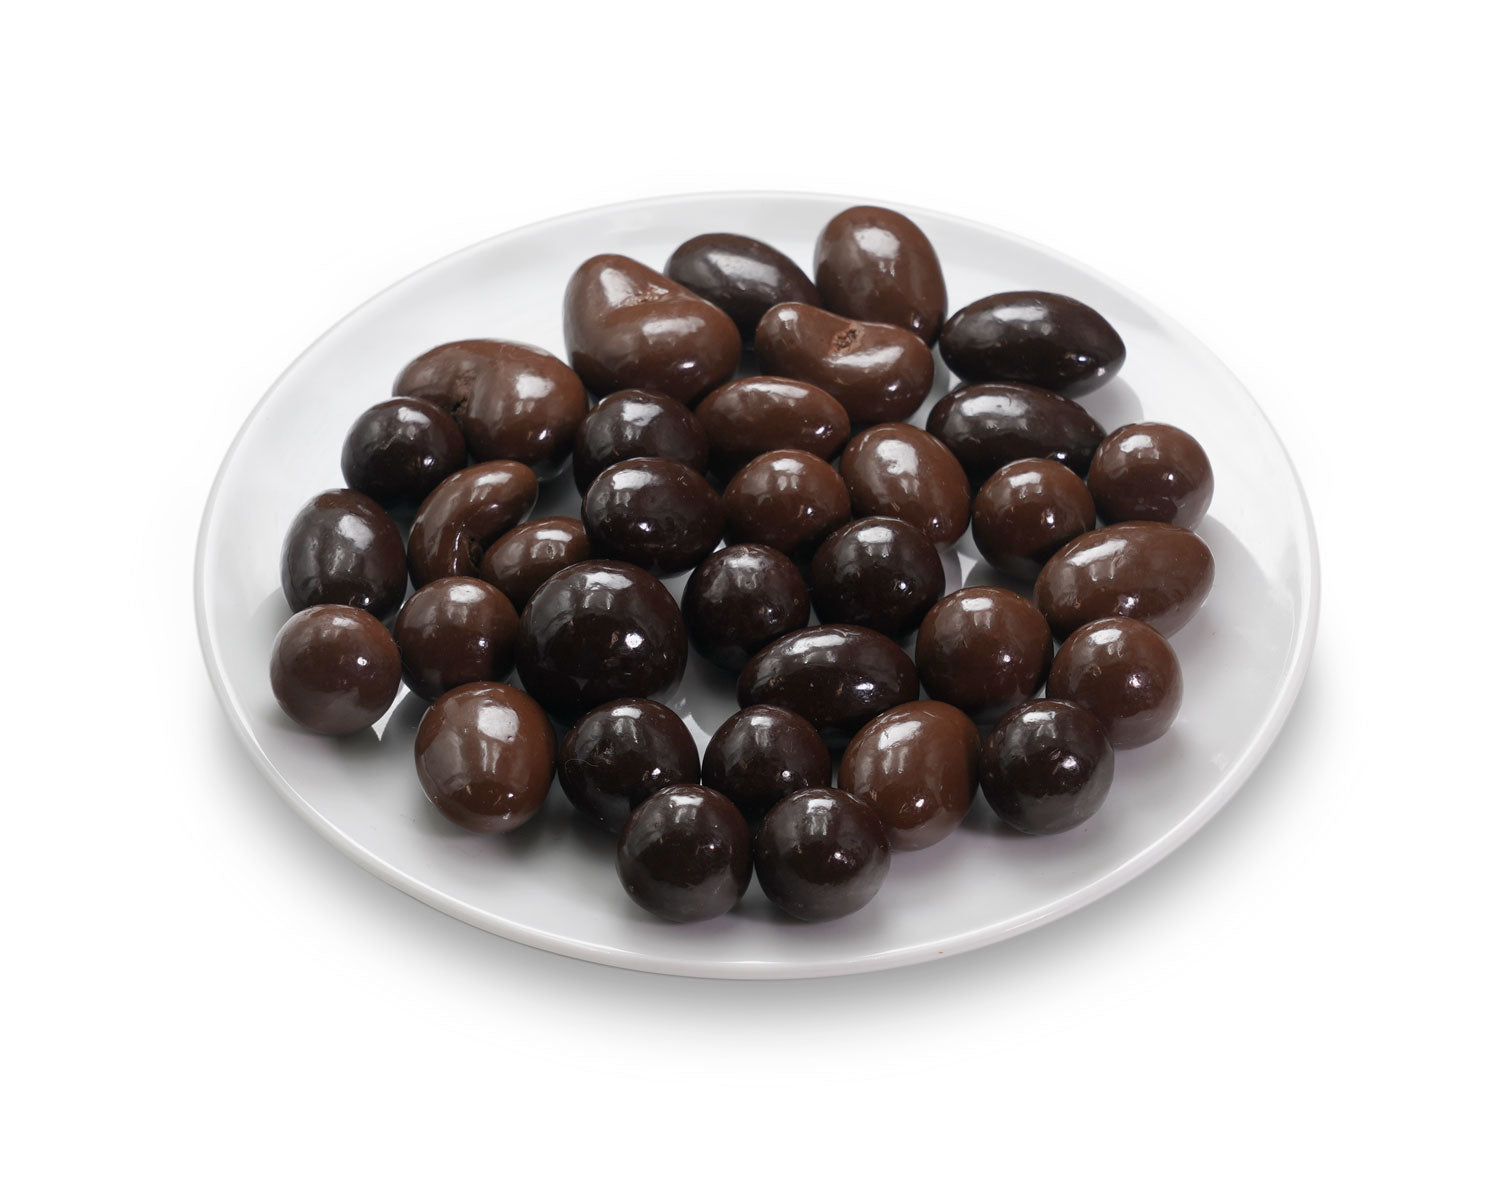 Bridge mix - almonds, peanuts Brazil nuts and almonds covered in milk and dark chocolate